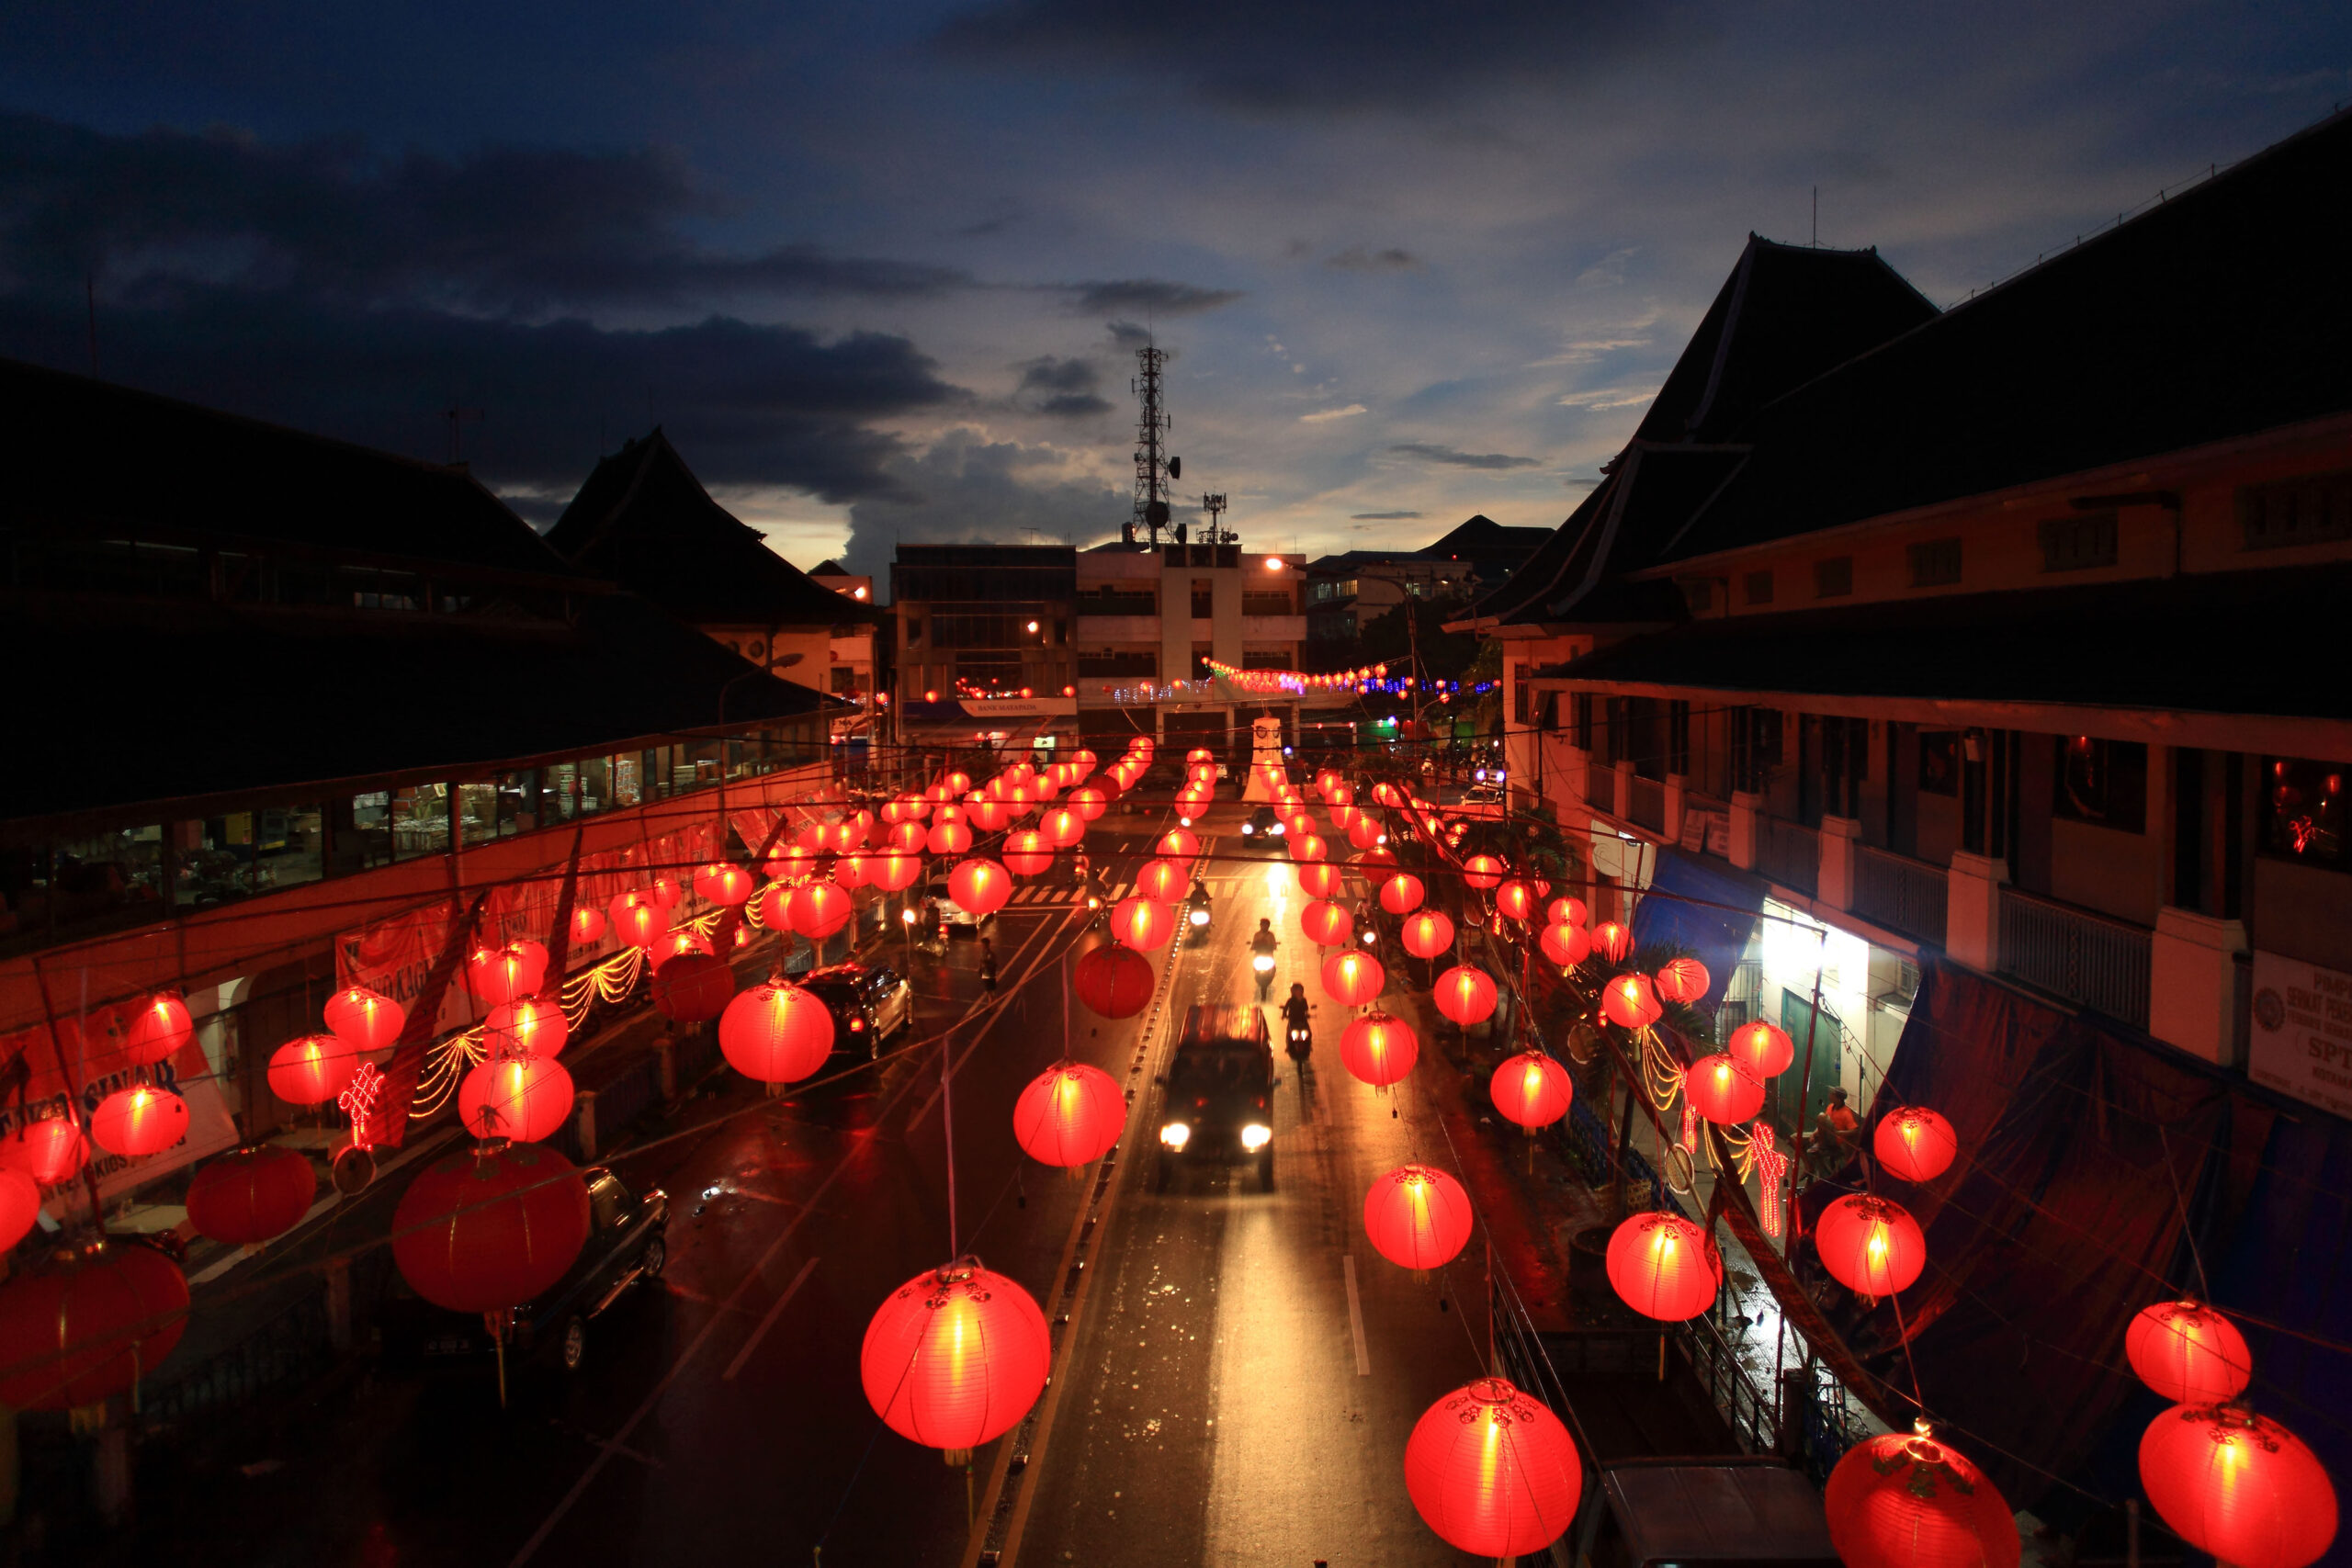 Batam City Decorated With Chinese Ornaments and Trinkets